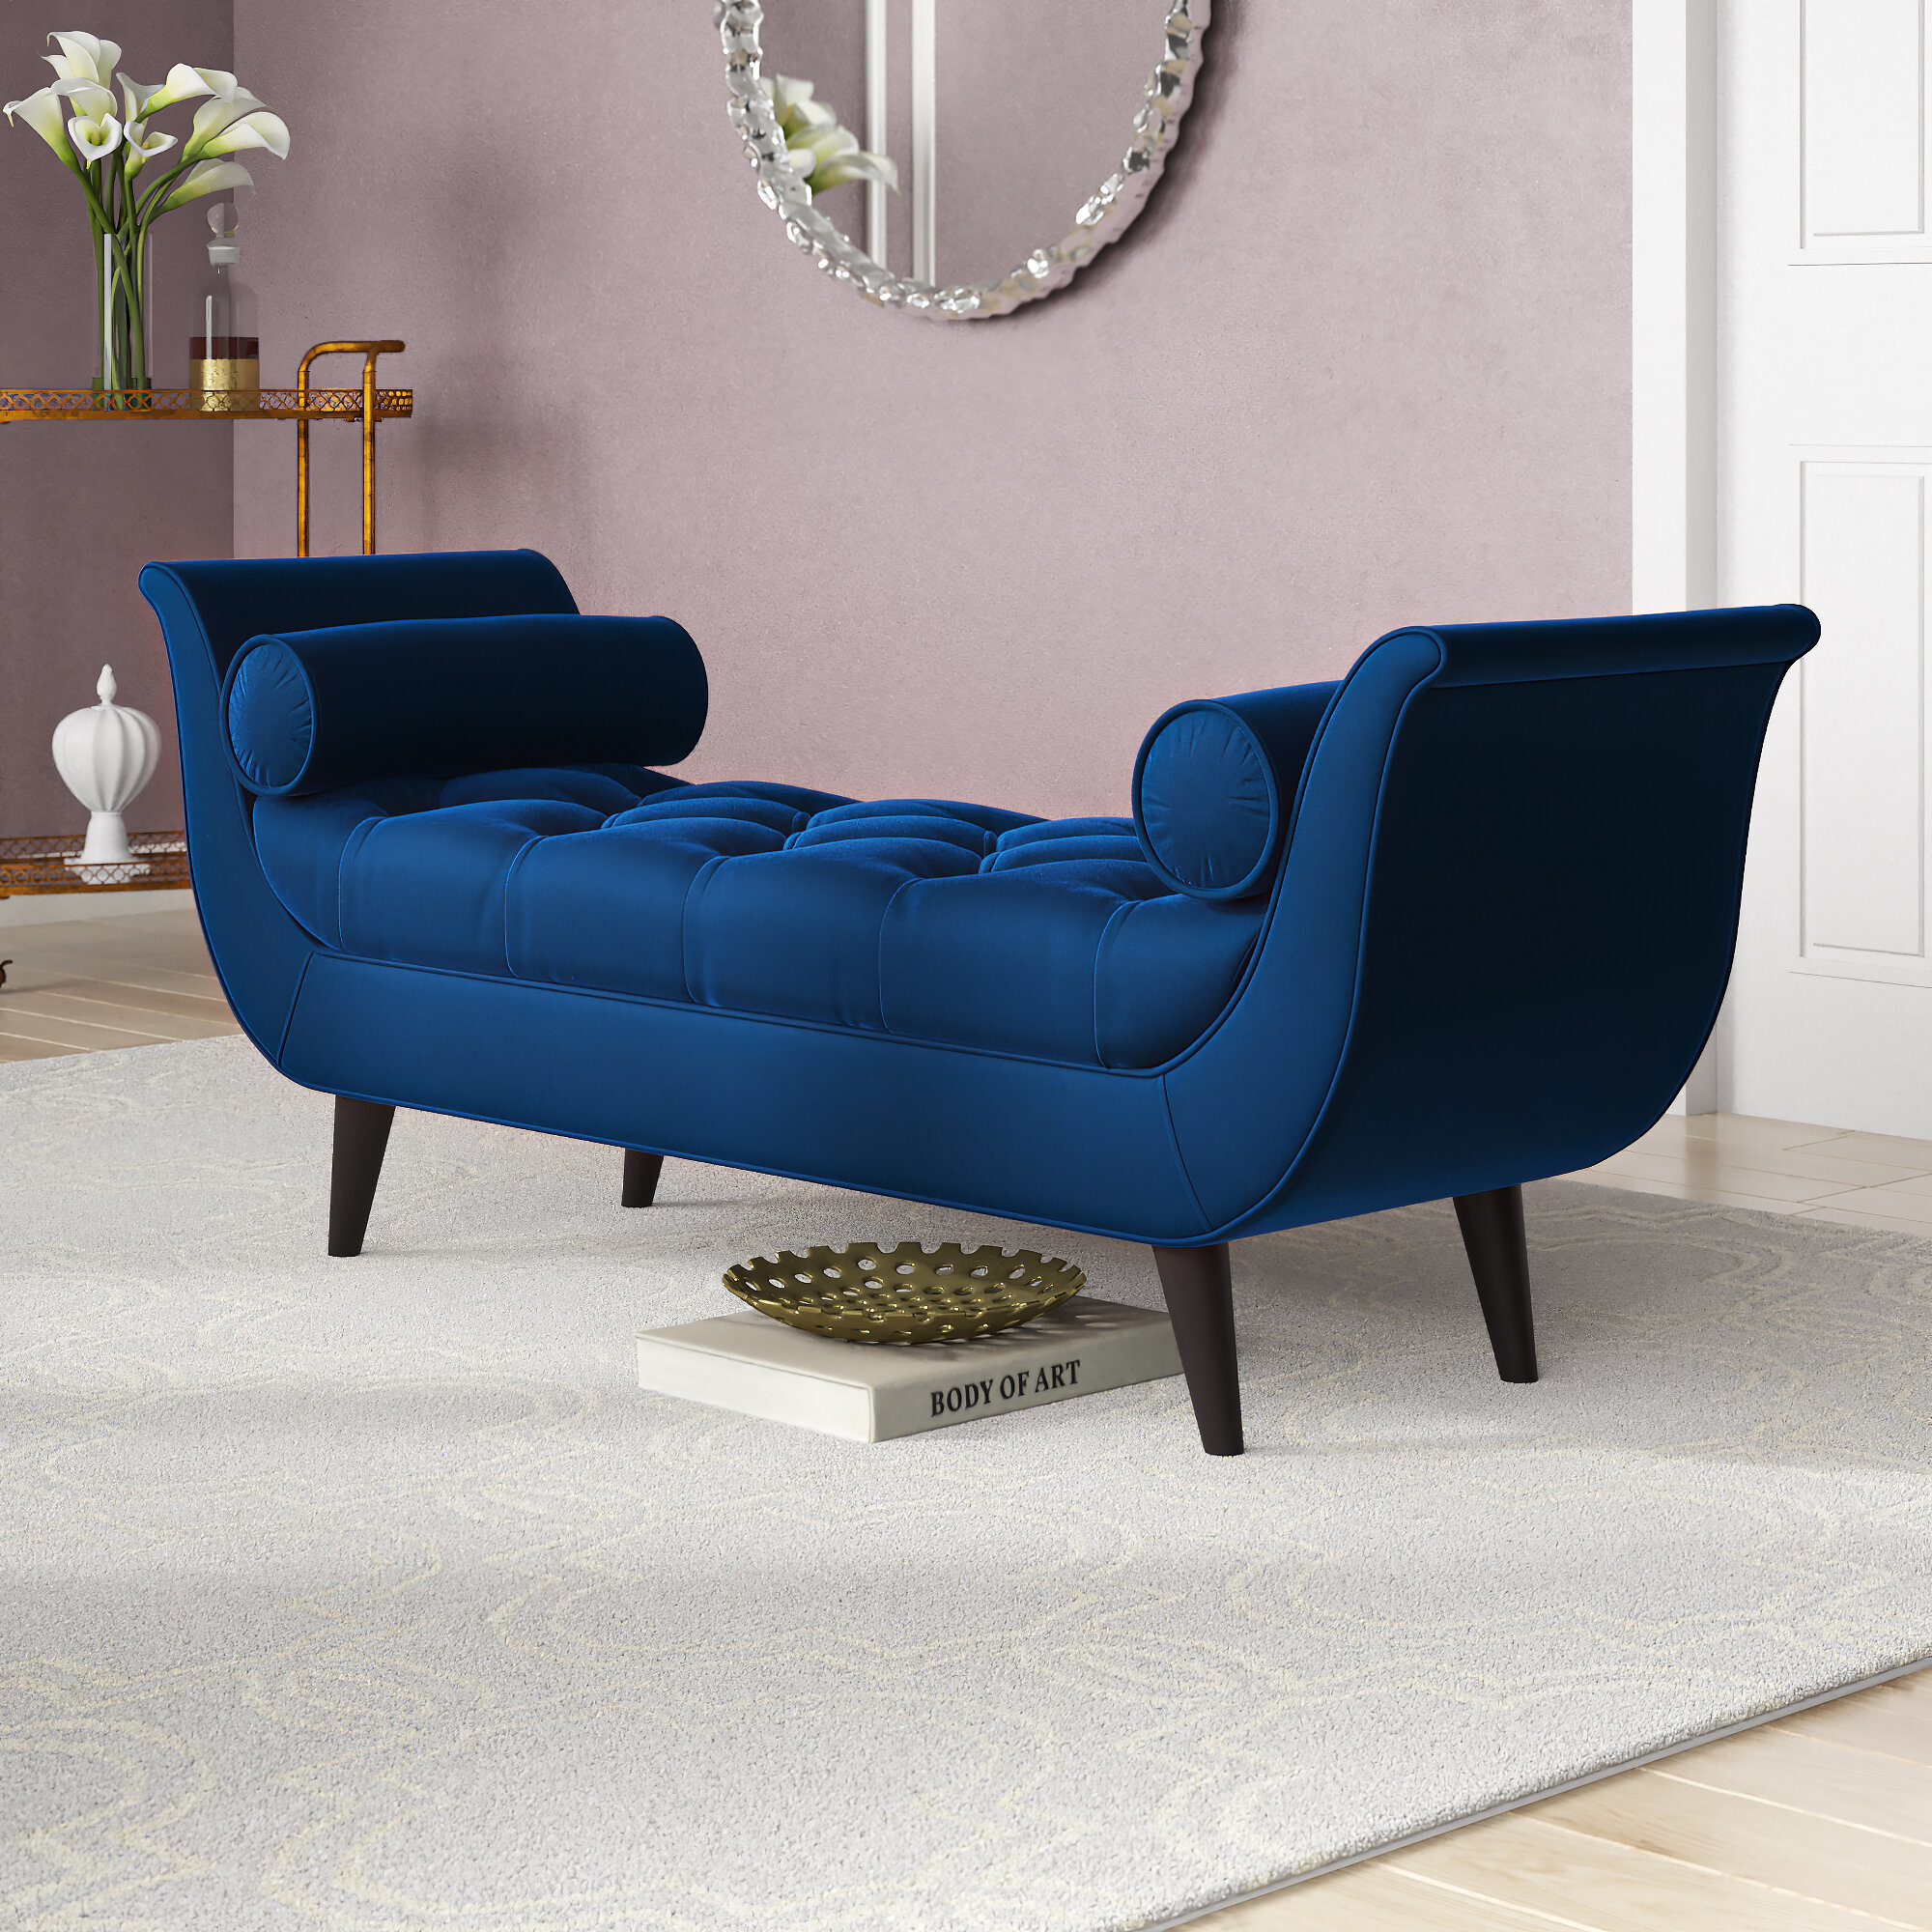 Bedroom Blue Benches You Ll Love In 2021 Wayfair